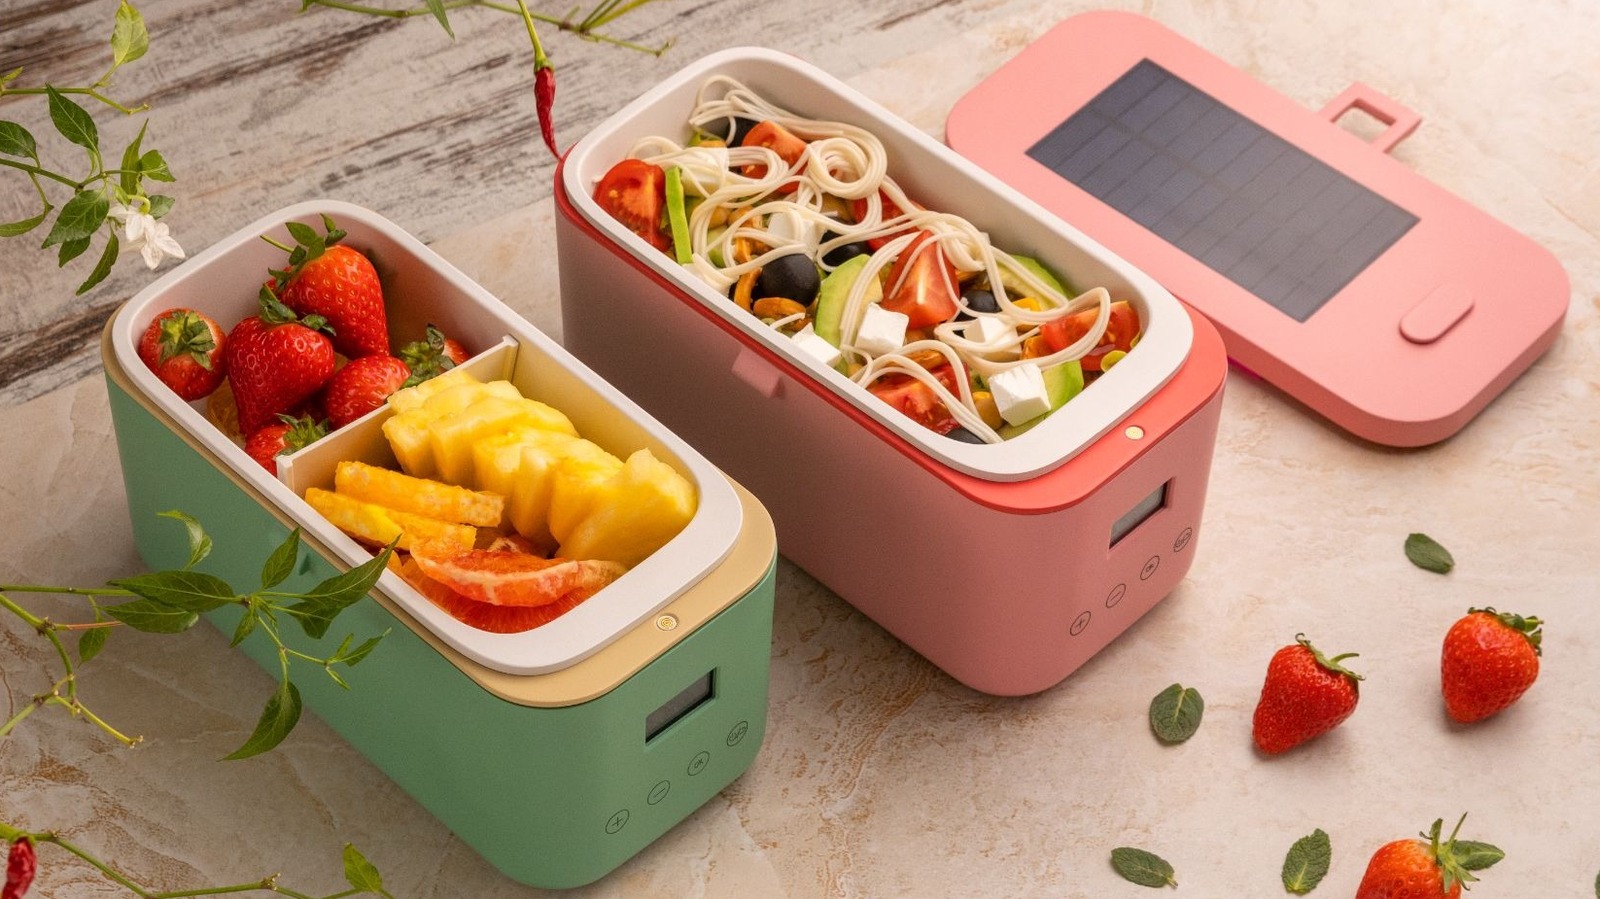 https://www.mashed.com/img/gallery/the-lunchbox-that-uses-solar-power-to-keep-your-food-warm-or-cold/l-intro-1655314337.jpg